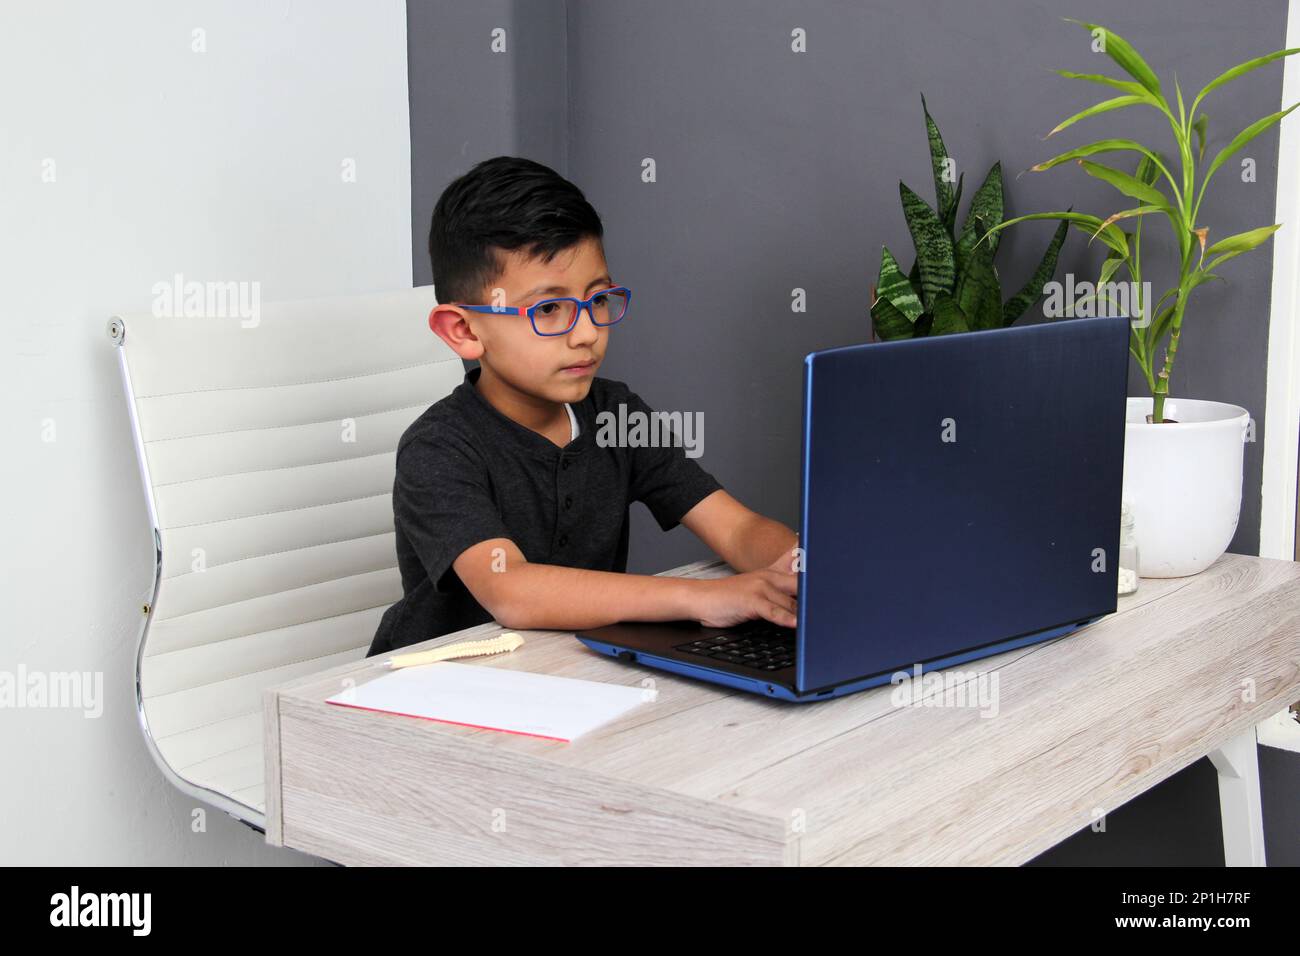 7-year-old Latino boy with glasses does home schooling takes online classes at home on a desk with a laptop, studies, is surprised Stock Photo